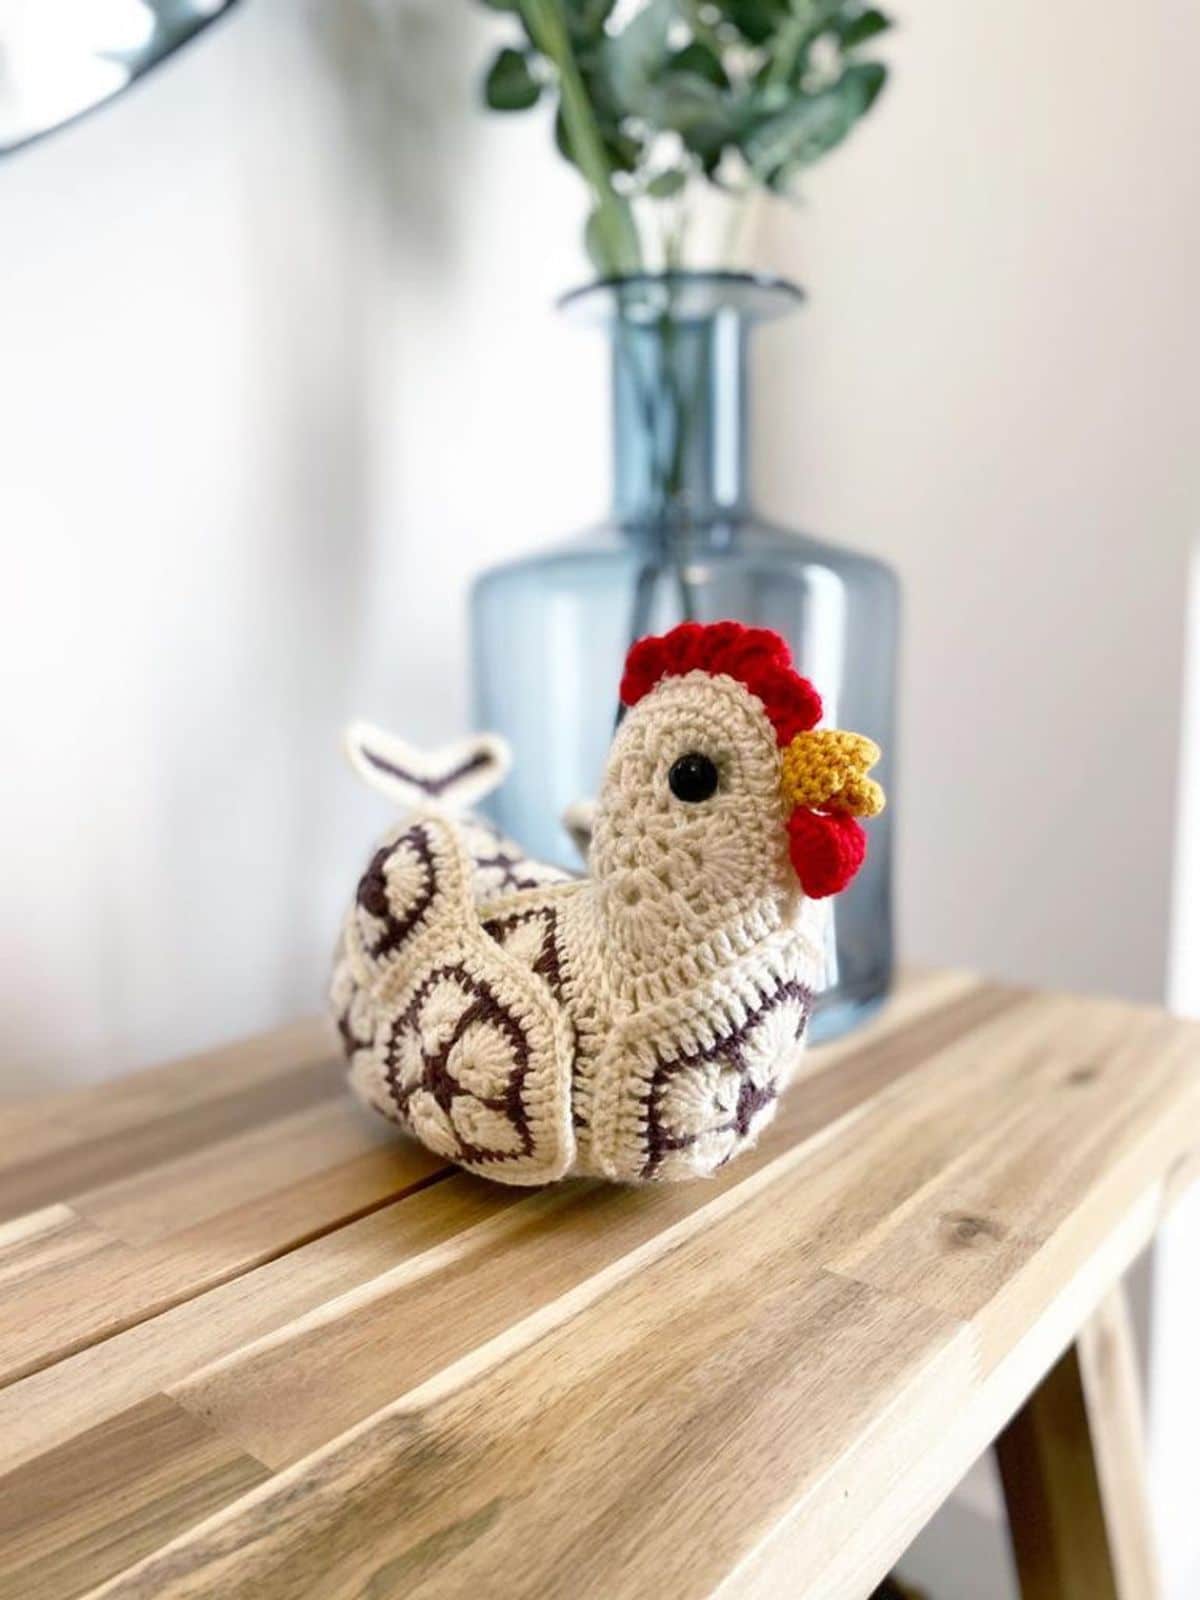 Small cream crochet Chicken with hexagons of brown flowers stitched around its body, a yellow beak, and red comb on a wooden table.